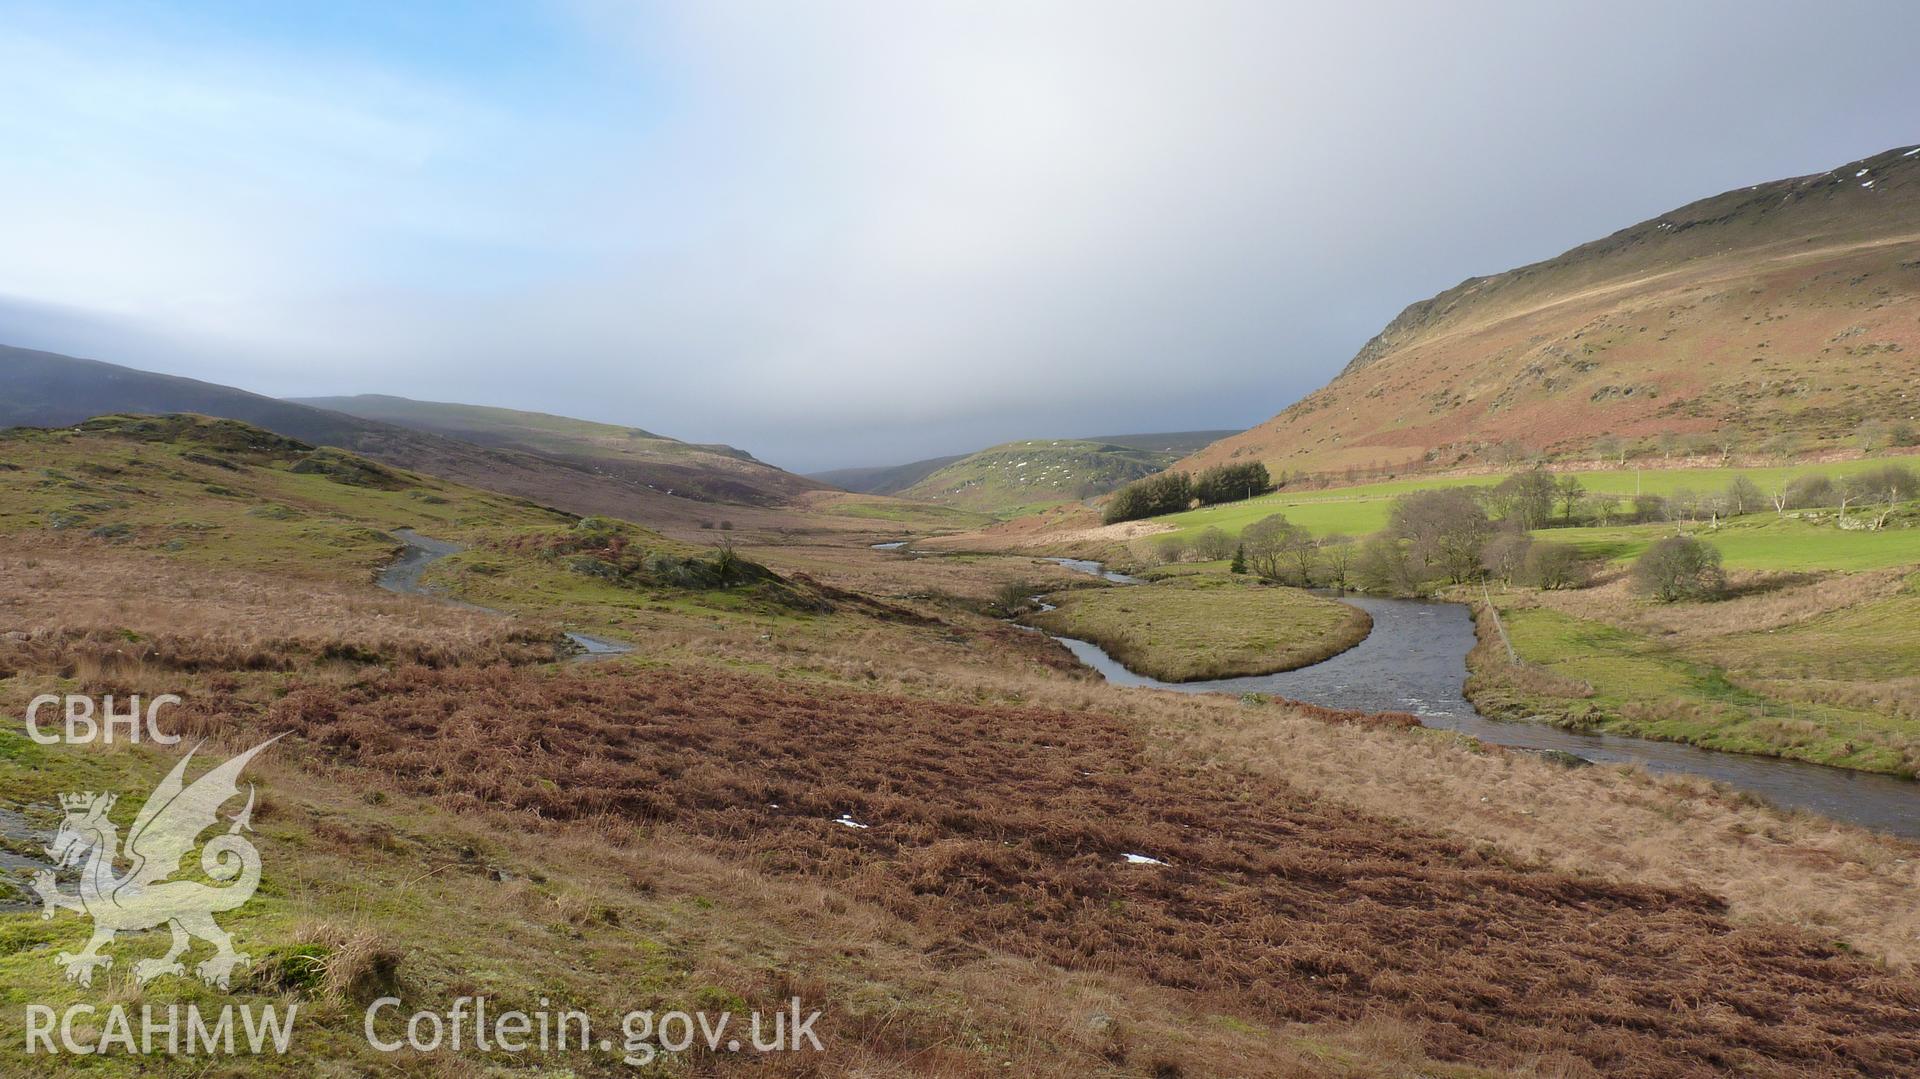 View up the valley from the head of the proposed development. Looking north west. Photographed for Archaeological Desk Based Assessment of Afon Claerwen, Elan Valley, Rhayader. Assessment conducted by Archaeology Wales in 2017-18. Project no. 2573.